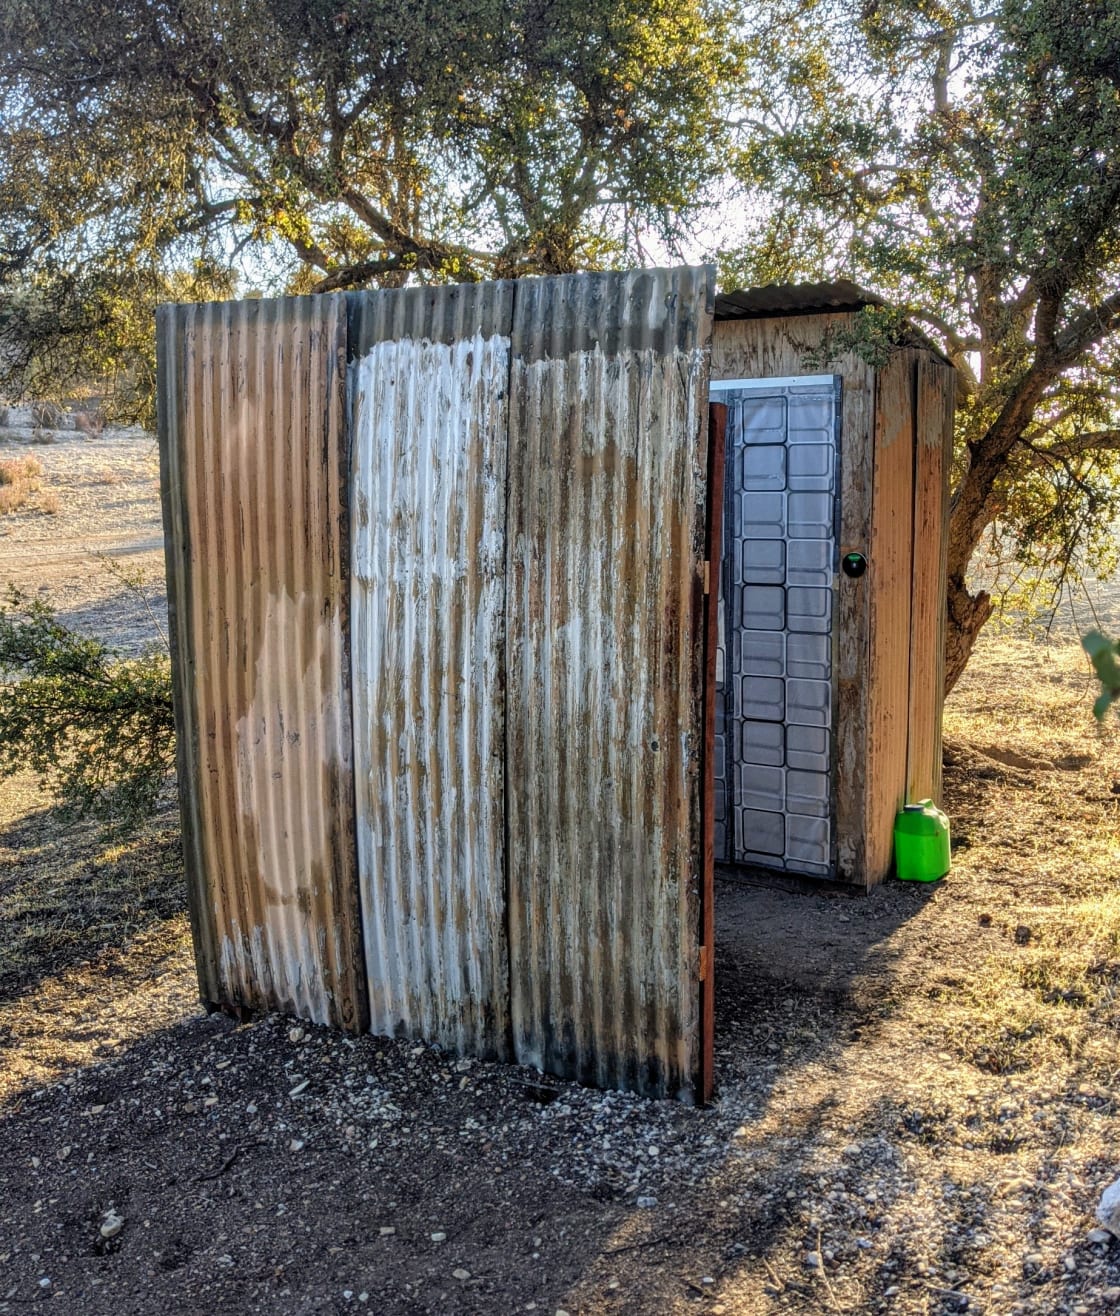 Toilets. Don't let the corrugated metal fool you, it's actually a pretty nice toilet.